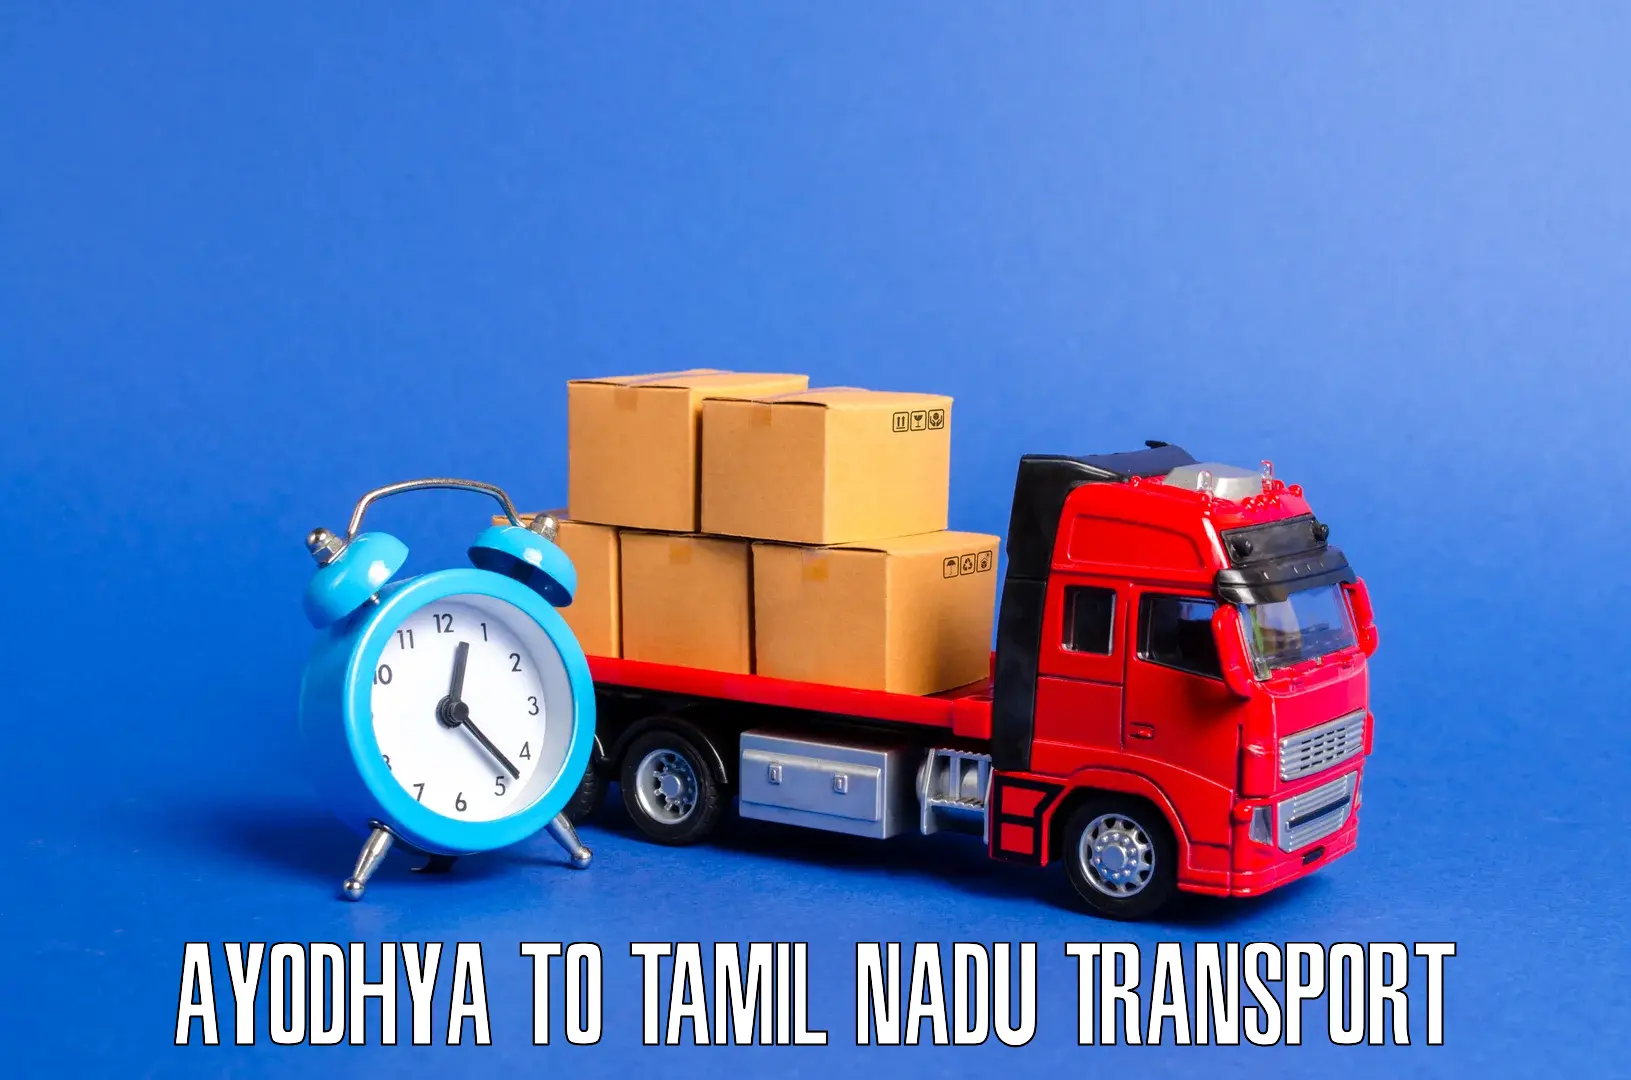 Truck transport companies in India Ayodhya to Memalur